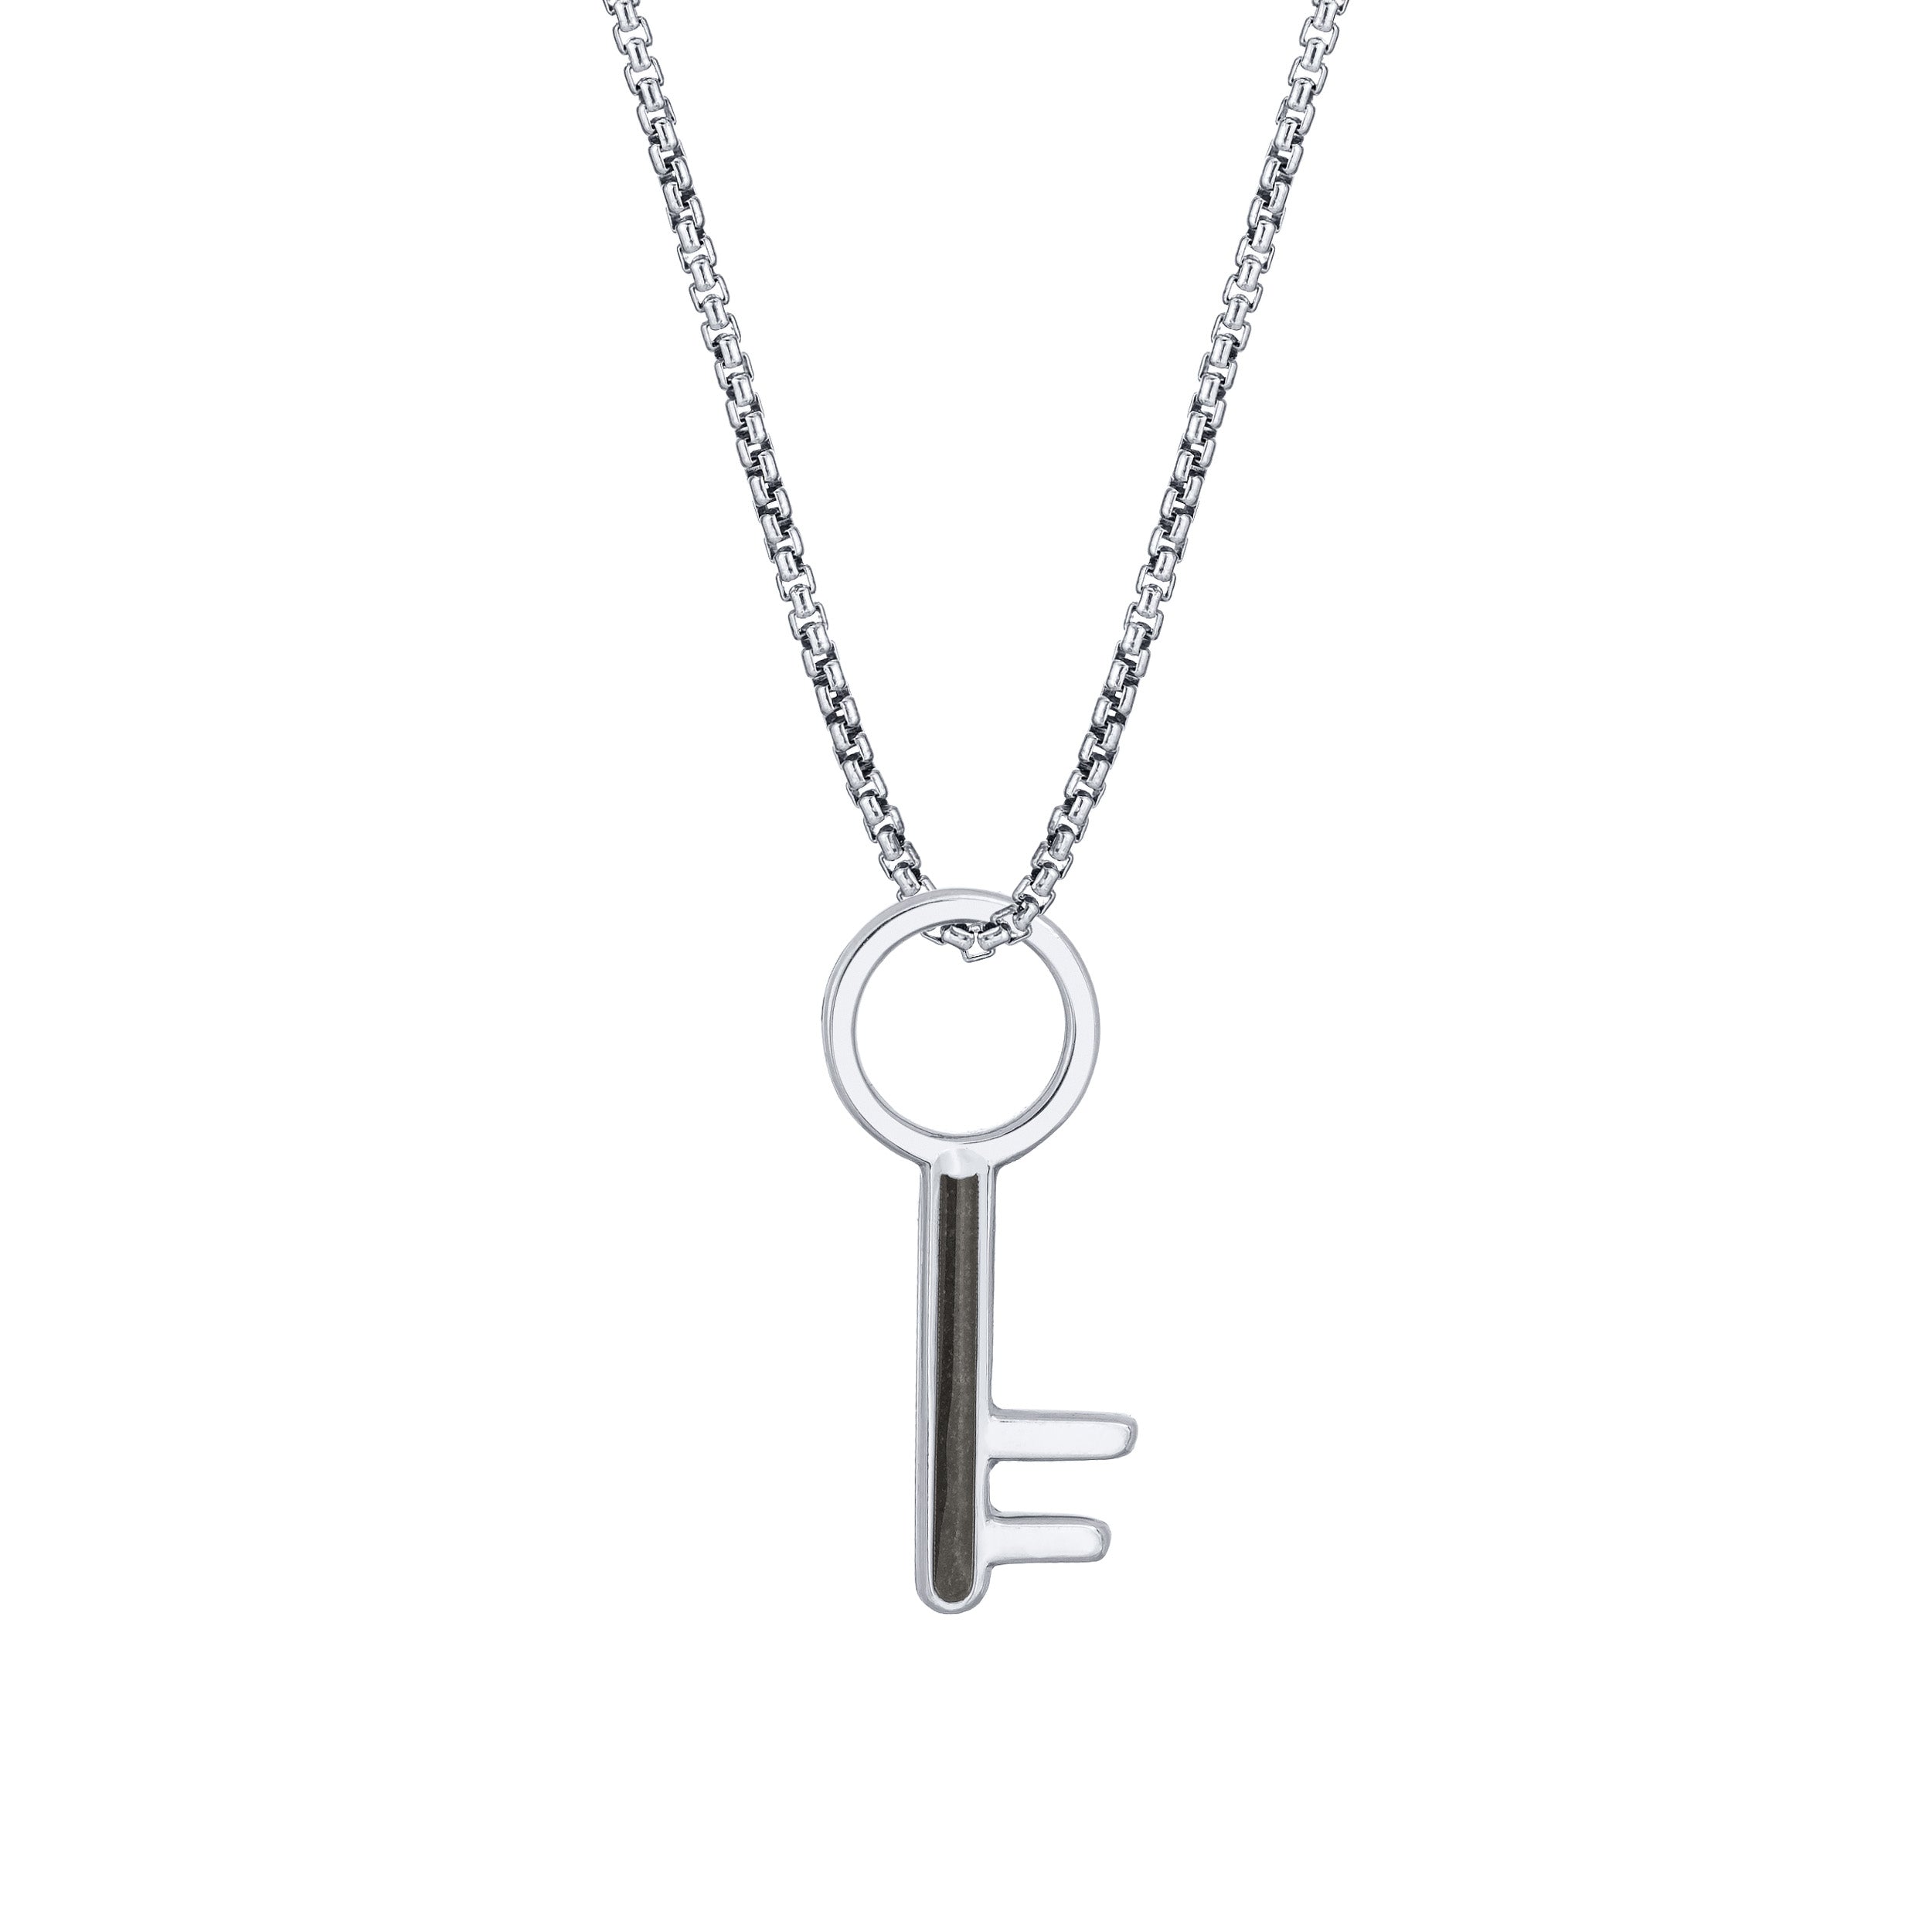 Tiny Key Pendant Necklace With Meteorite | Jewelry by Johan